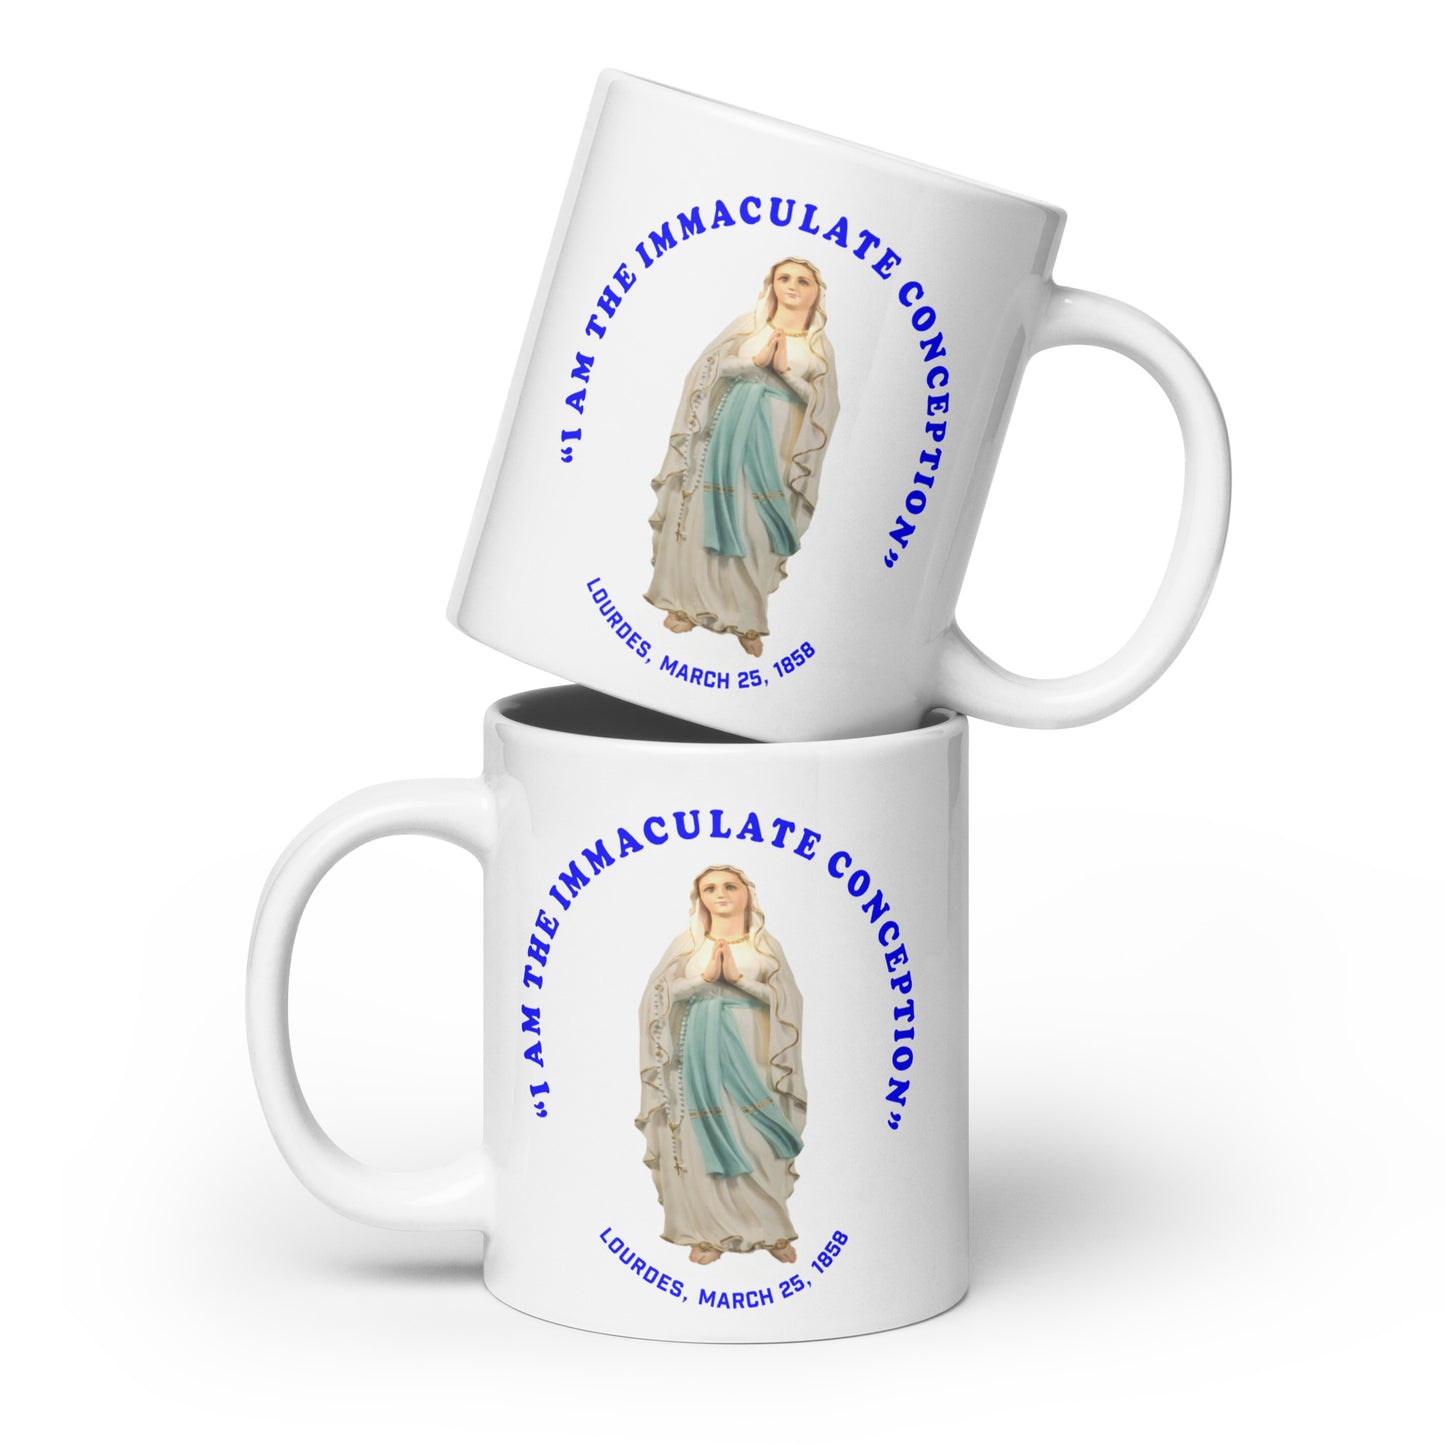 "I Am the Immaculate Conception" - Lourdes, France March 25, 1858 White glossy mug